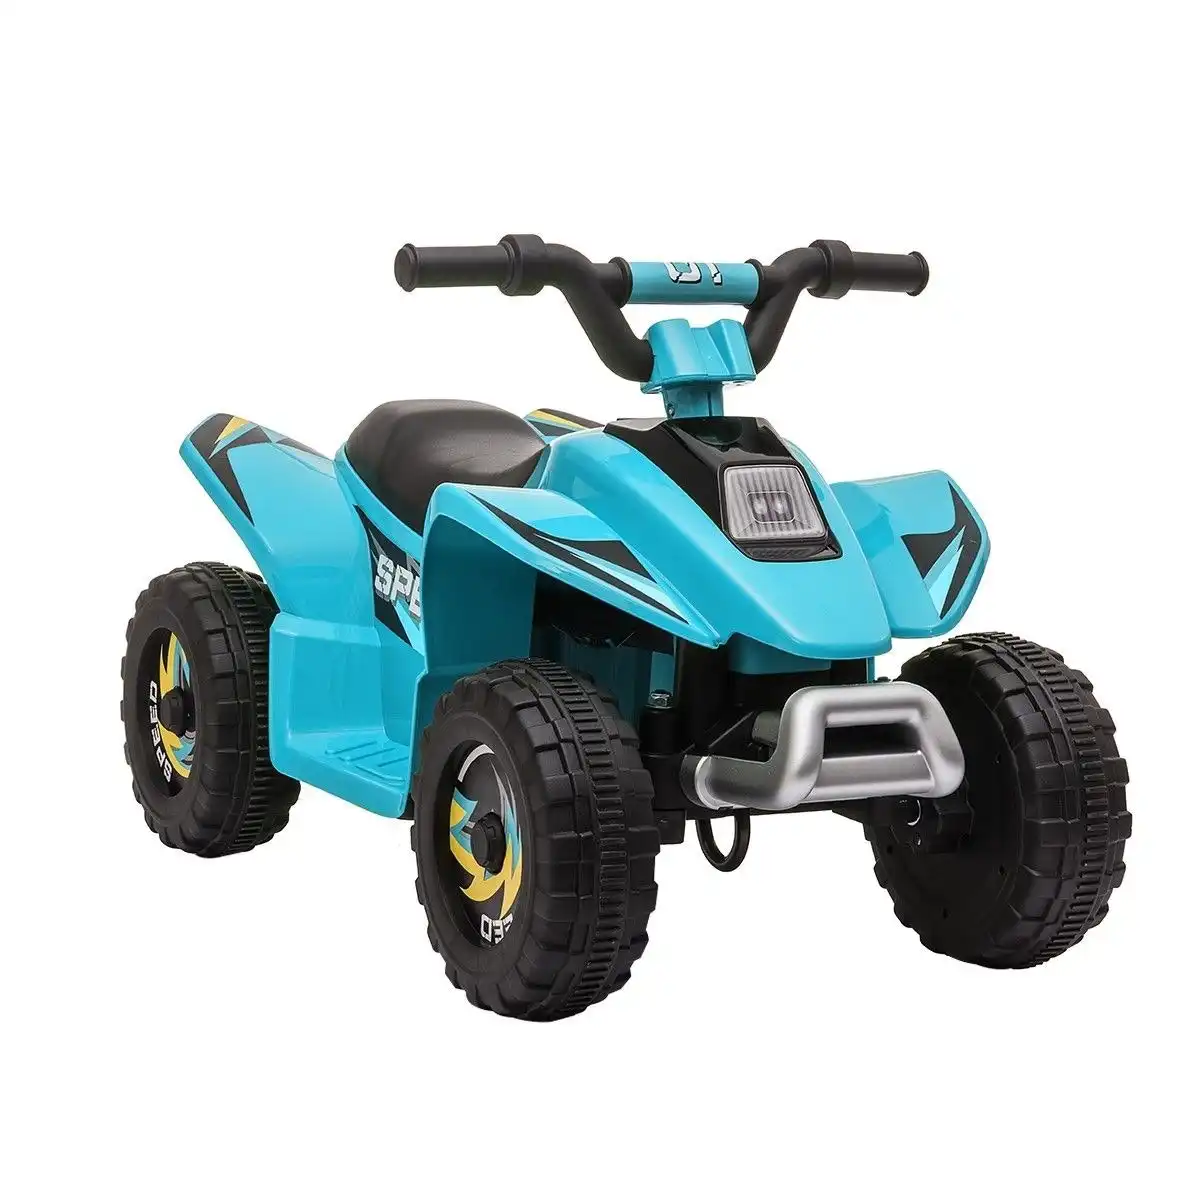 Ausway Kids Ride On Toy 6V Electric ATV Quad Rechargeable Battery Blue